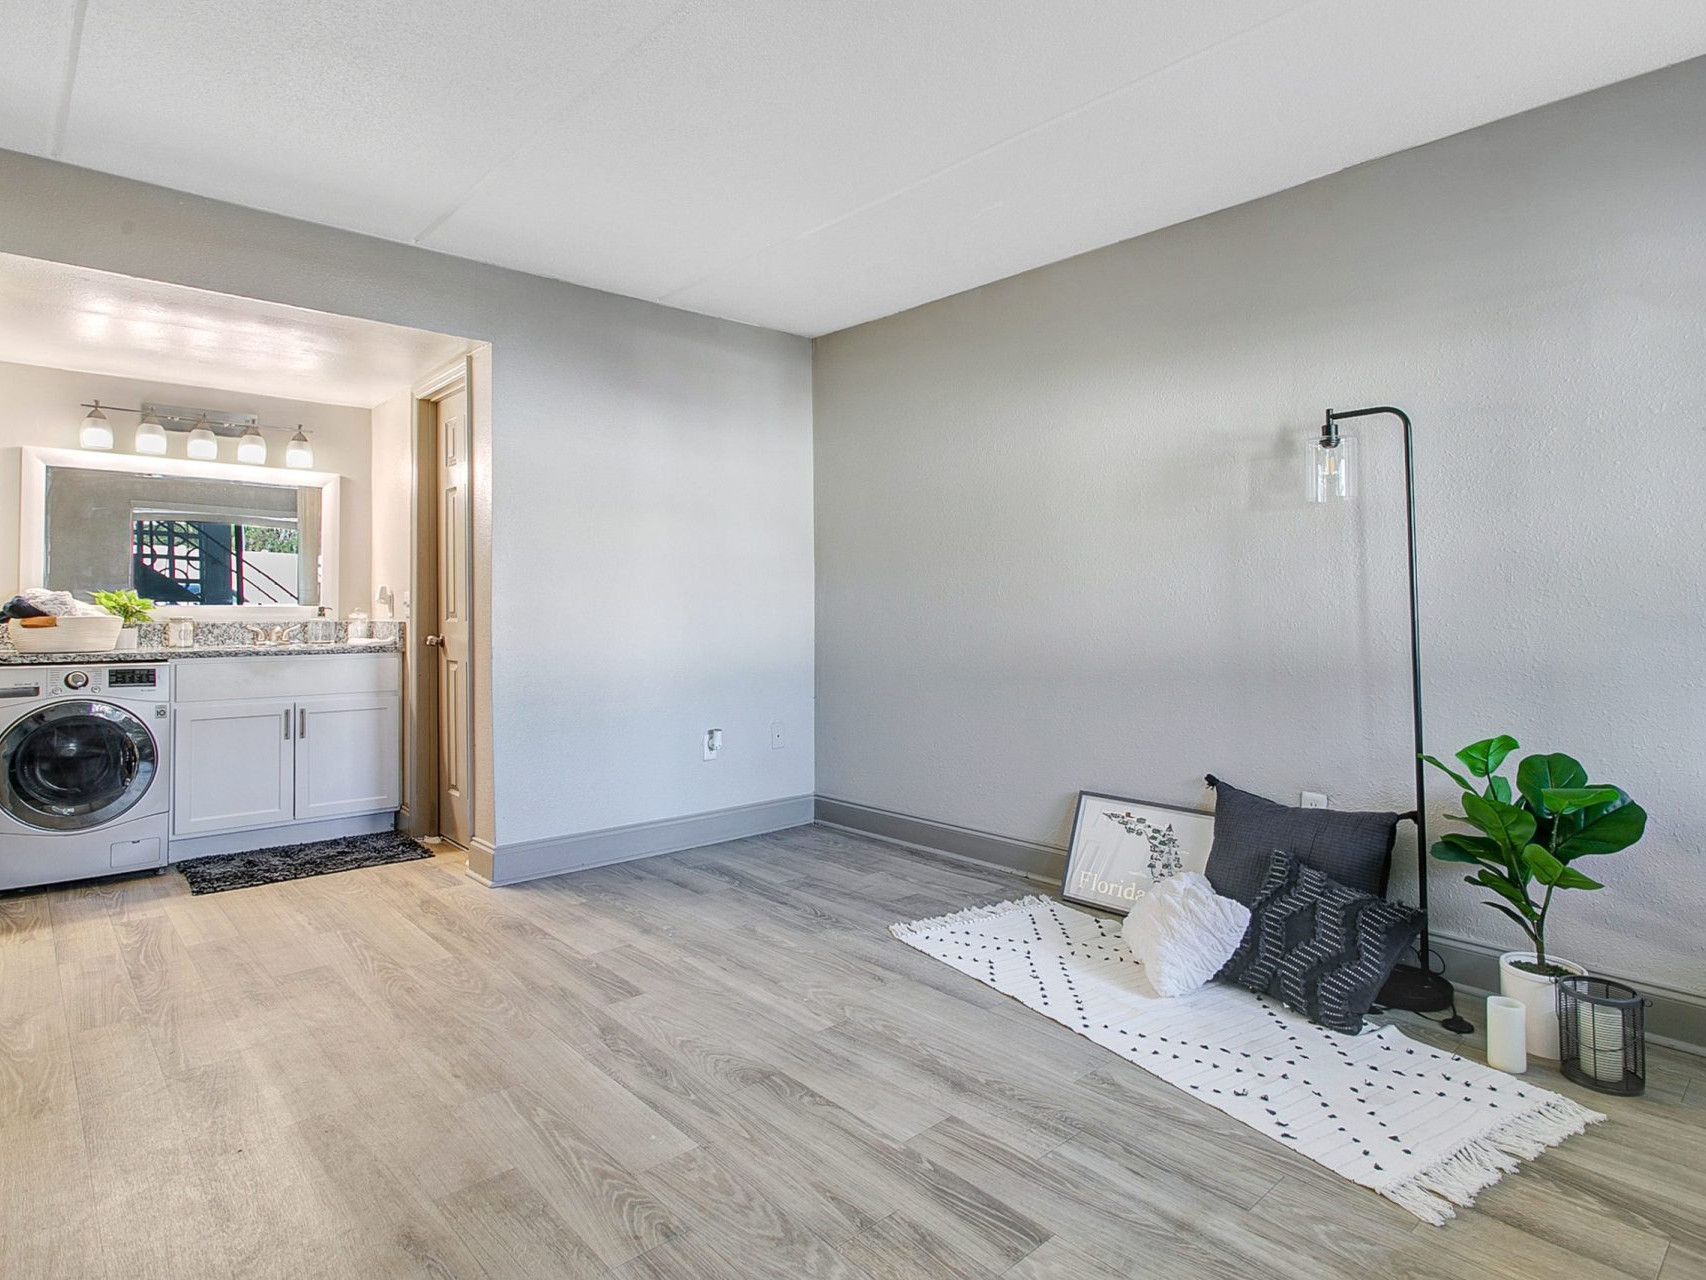 A living room with open access to a laundry area with a washer/dryer, built-in counters, and a large mirror.